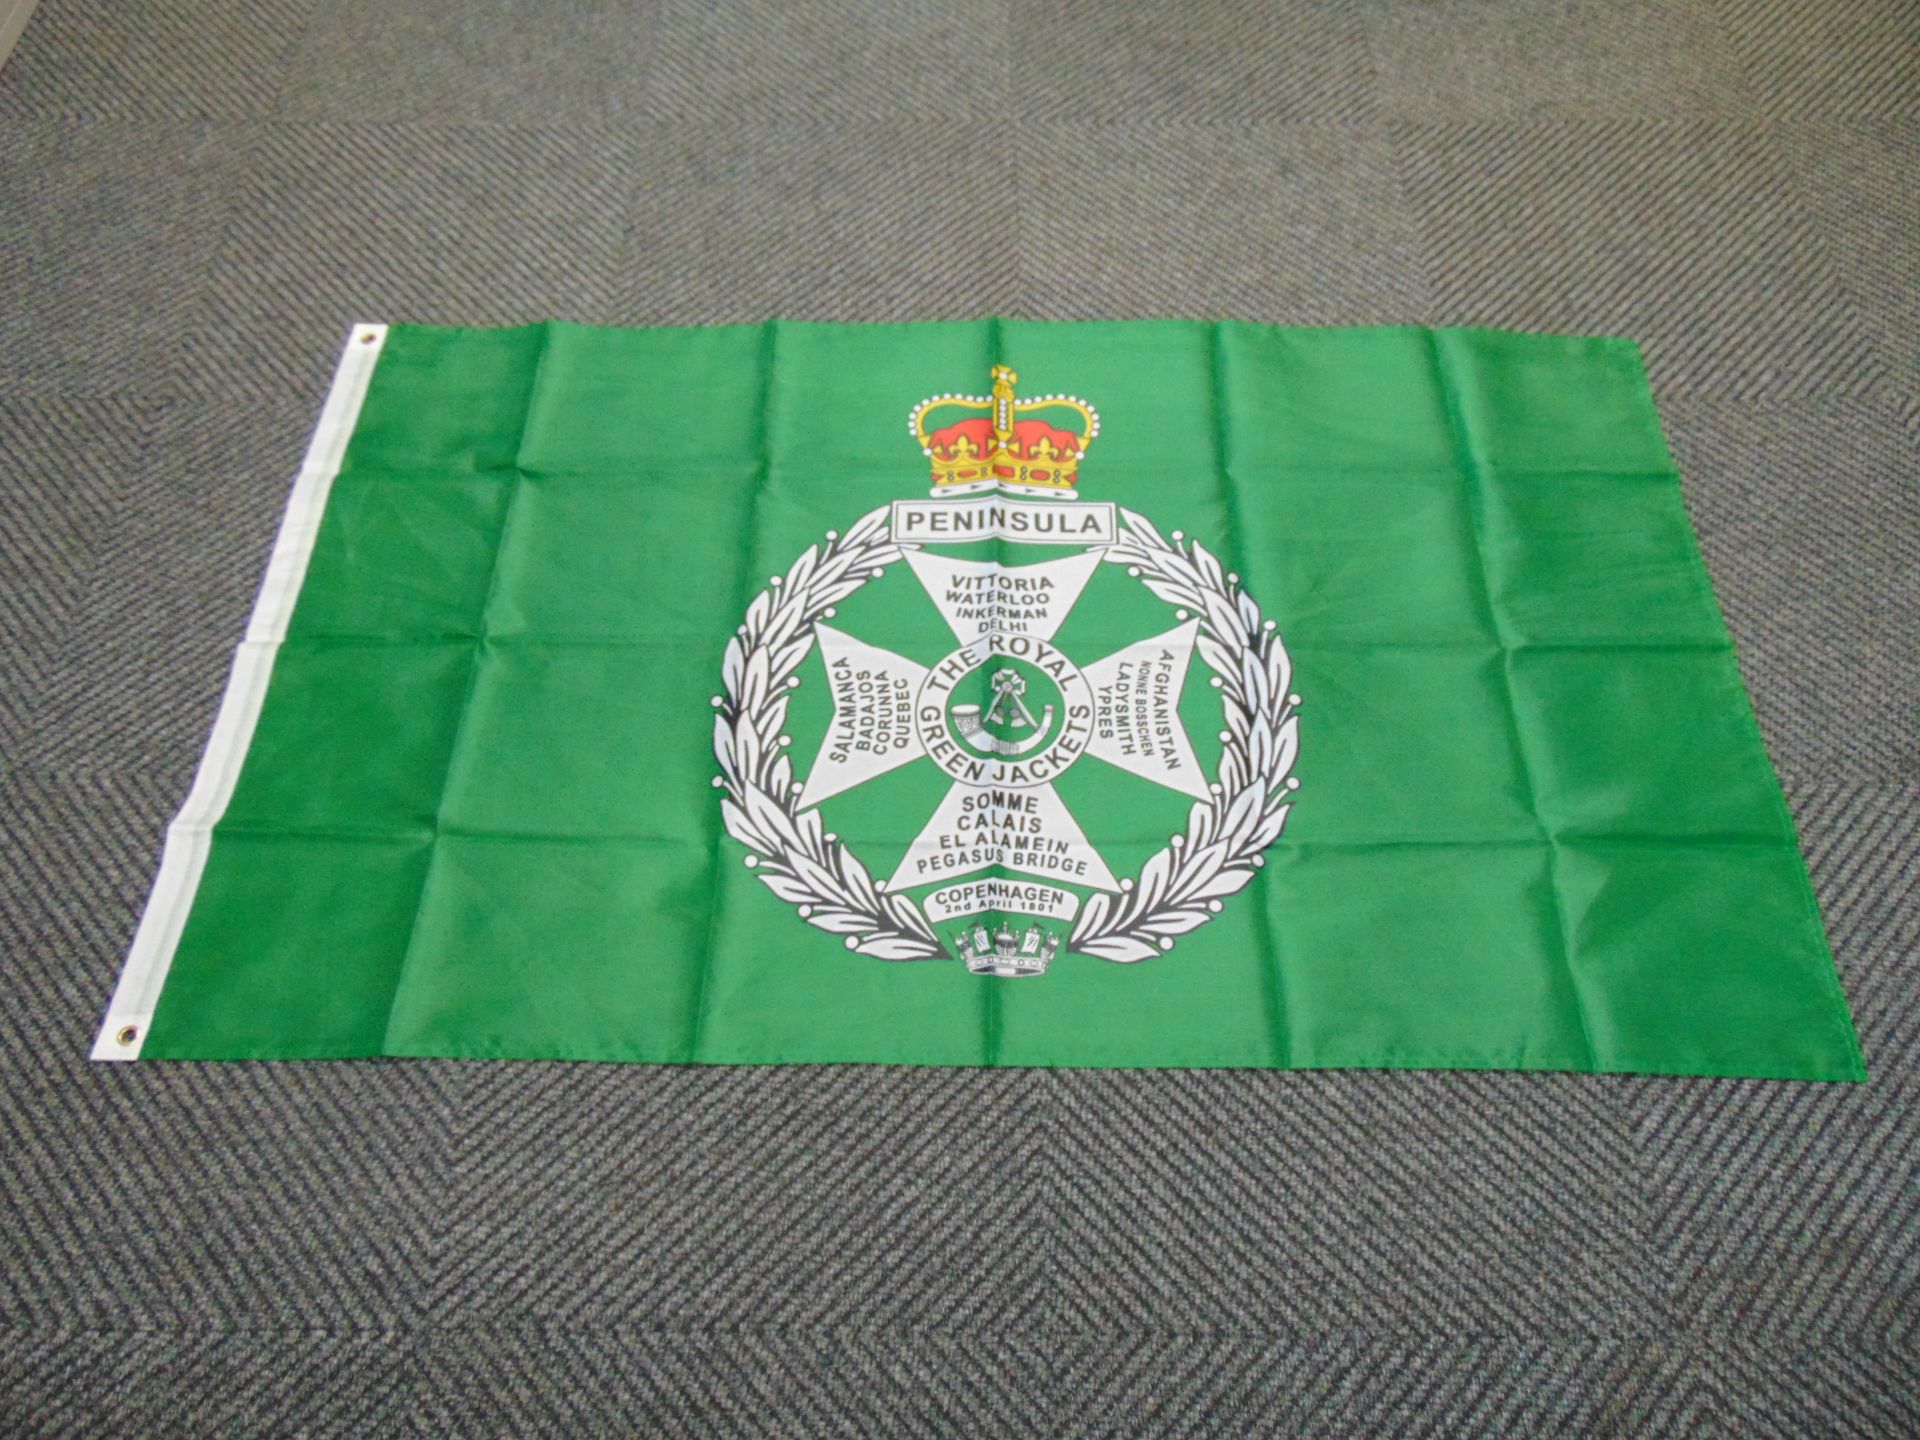 Royal Green Jackets Flag - 5ft x 3ft with Metal Eyelets. - Image 3 of 5